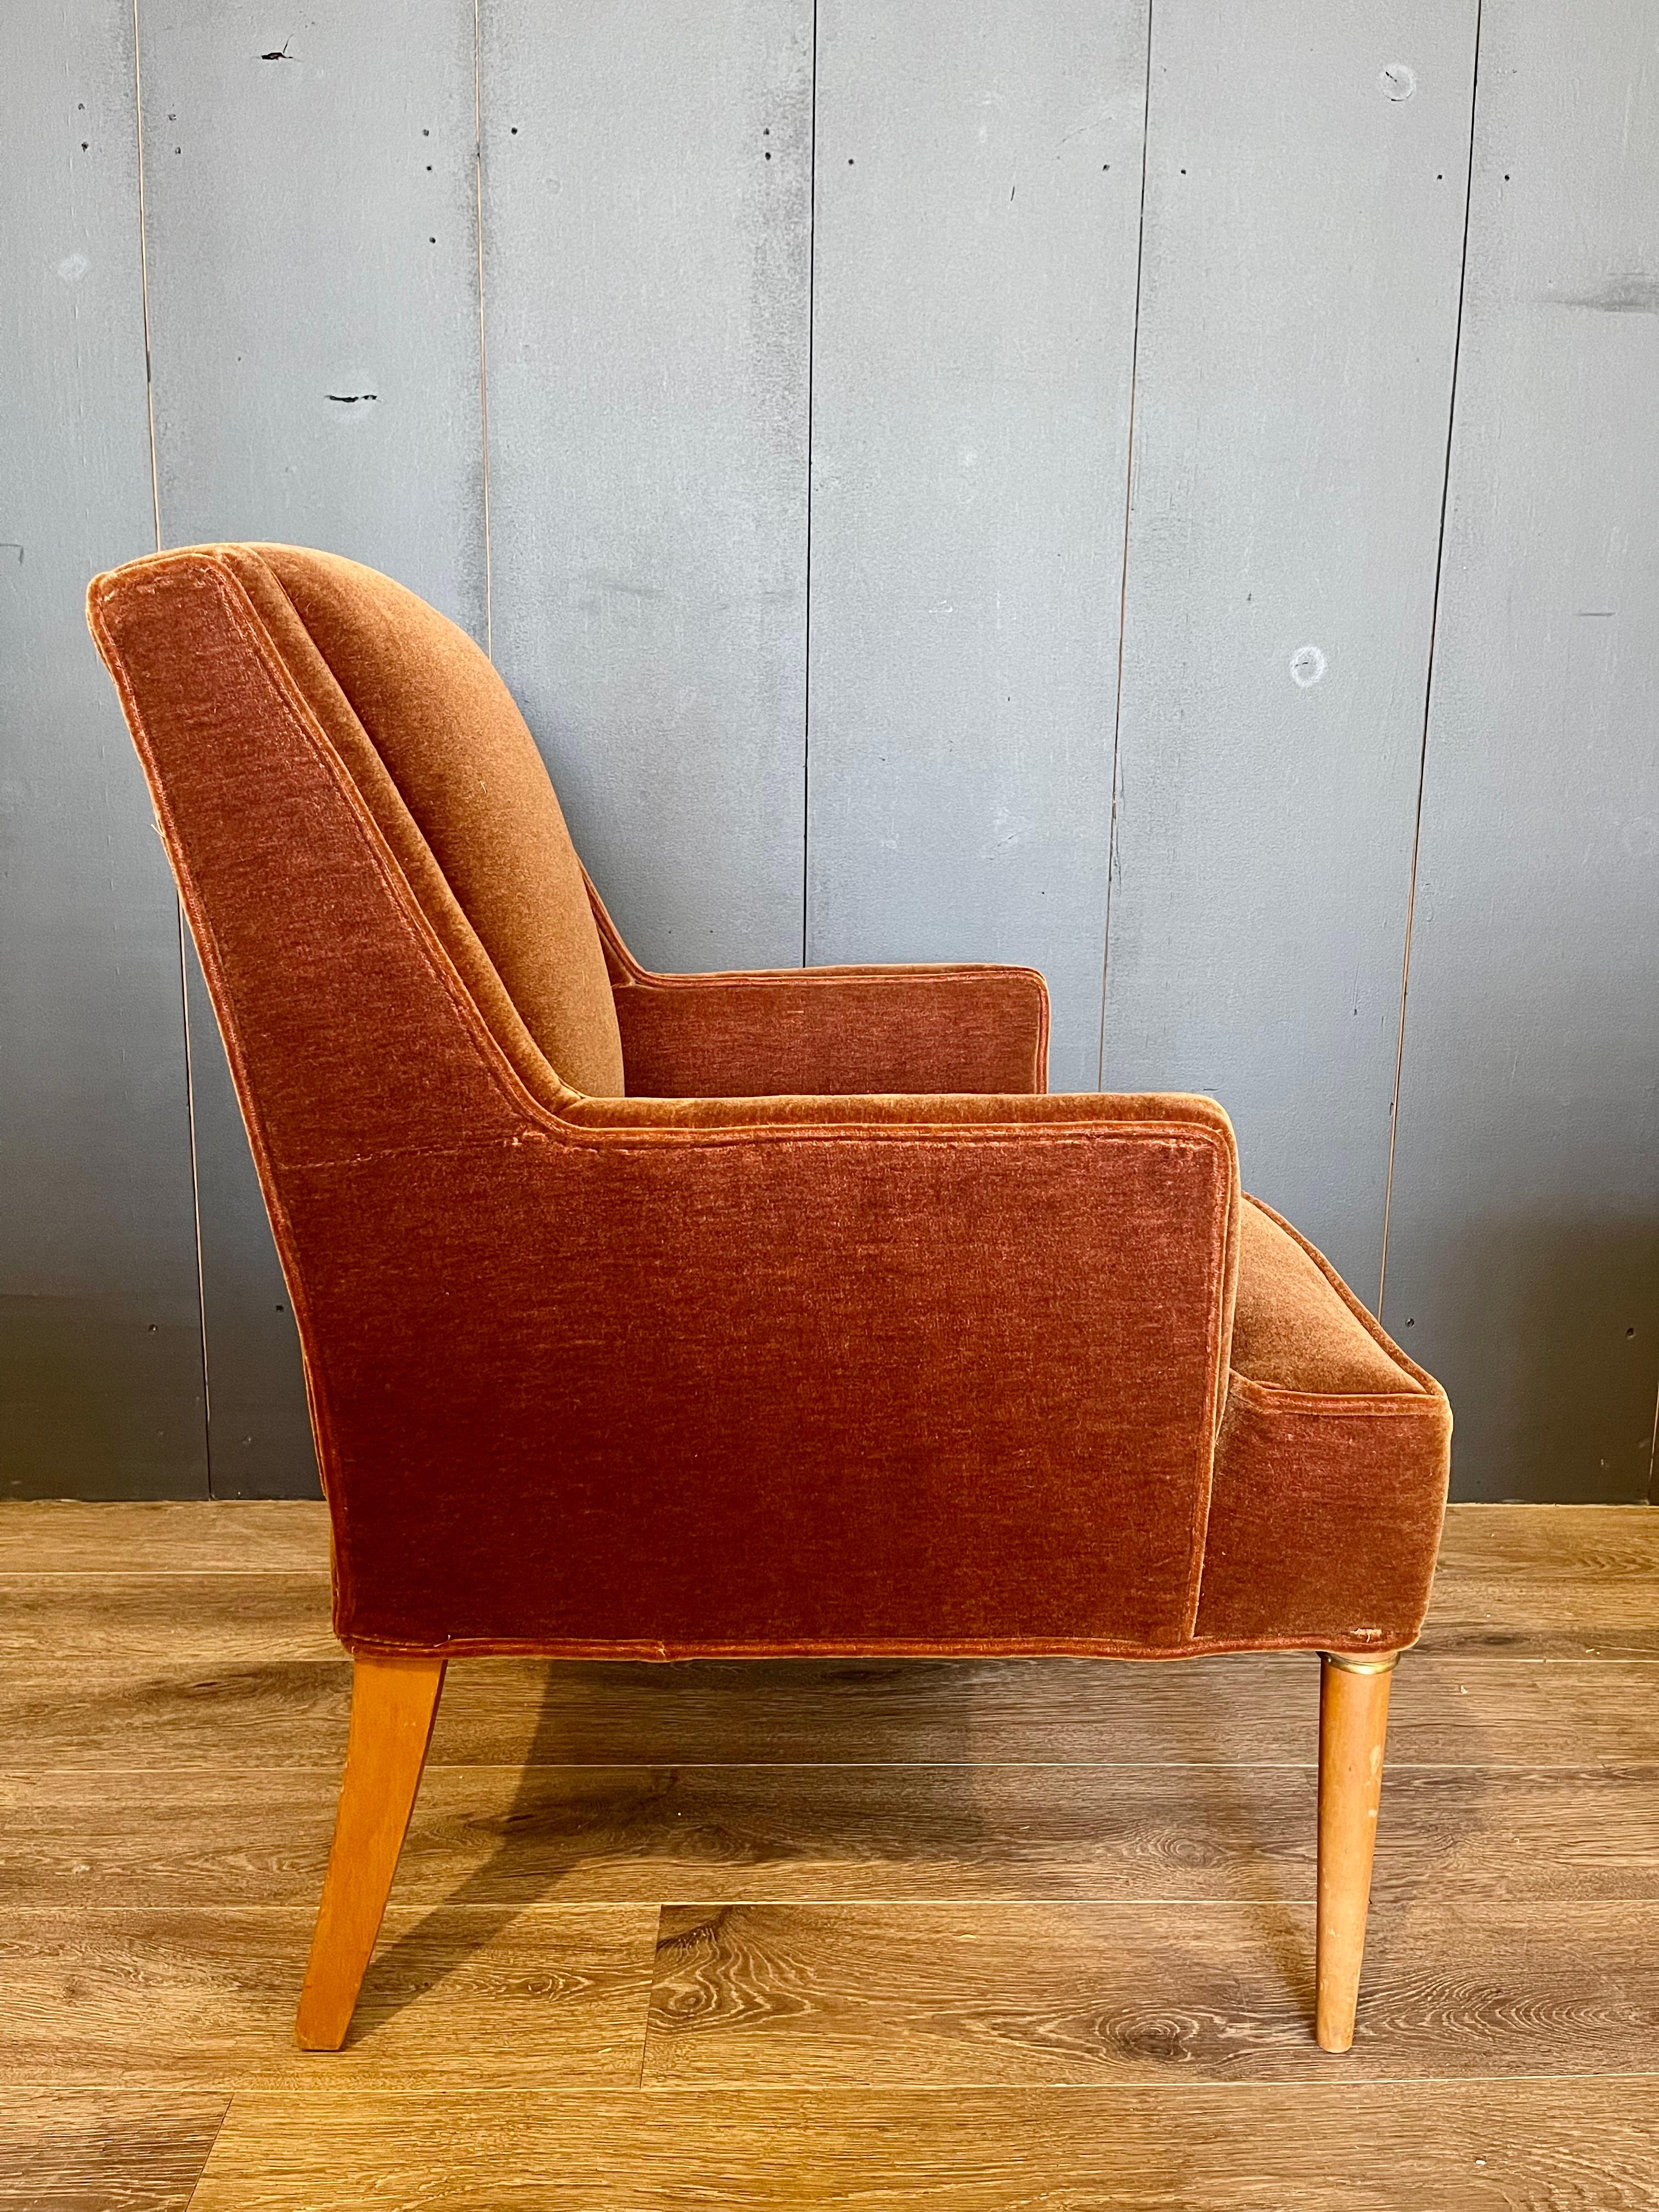 Mid-20th Century Mohair Mid-Century Accent Chair, in Rich Rust Colored Newly Upholstered Mohair For Sale